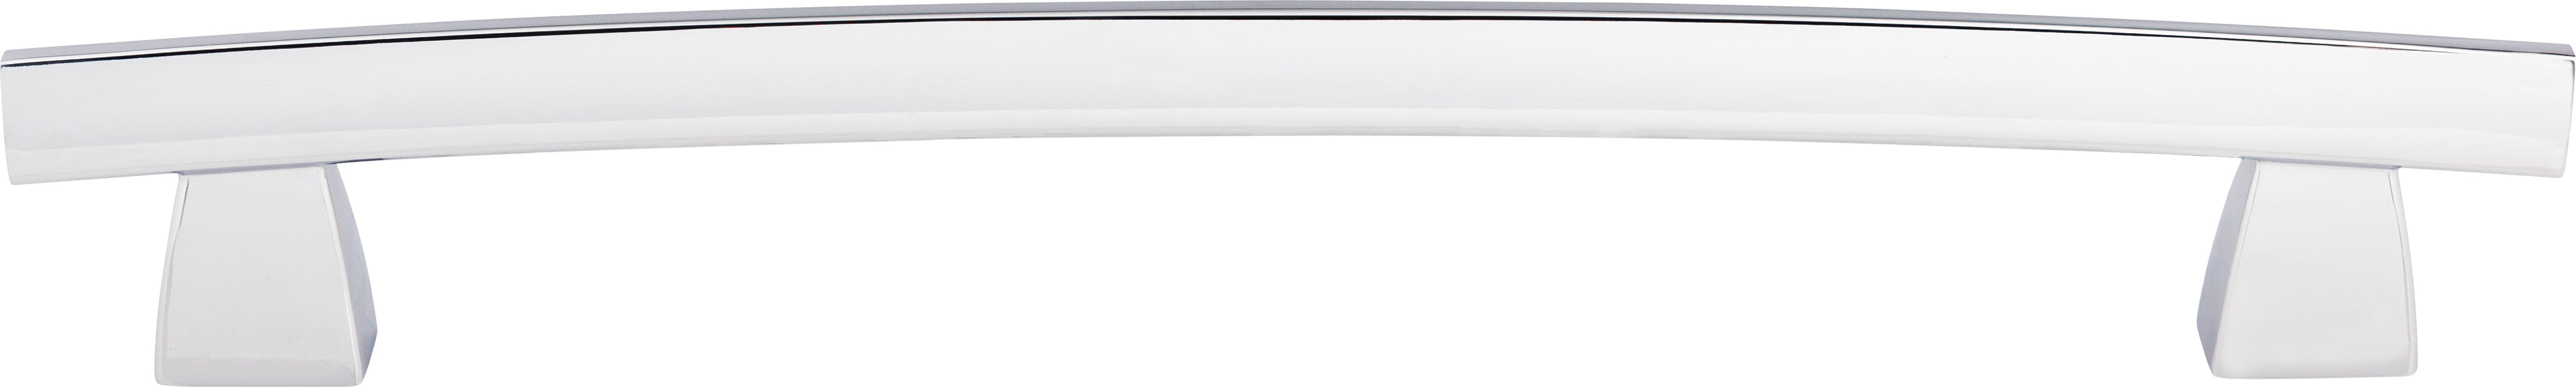 Arched Appliance Pull 12 Inch (c-c)